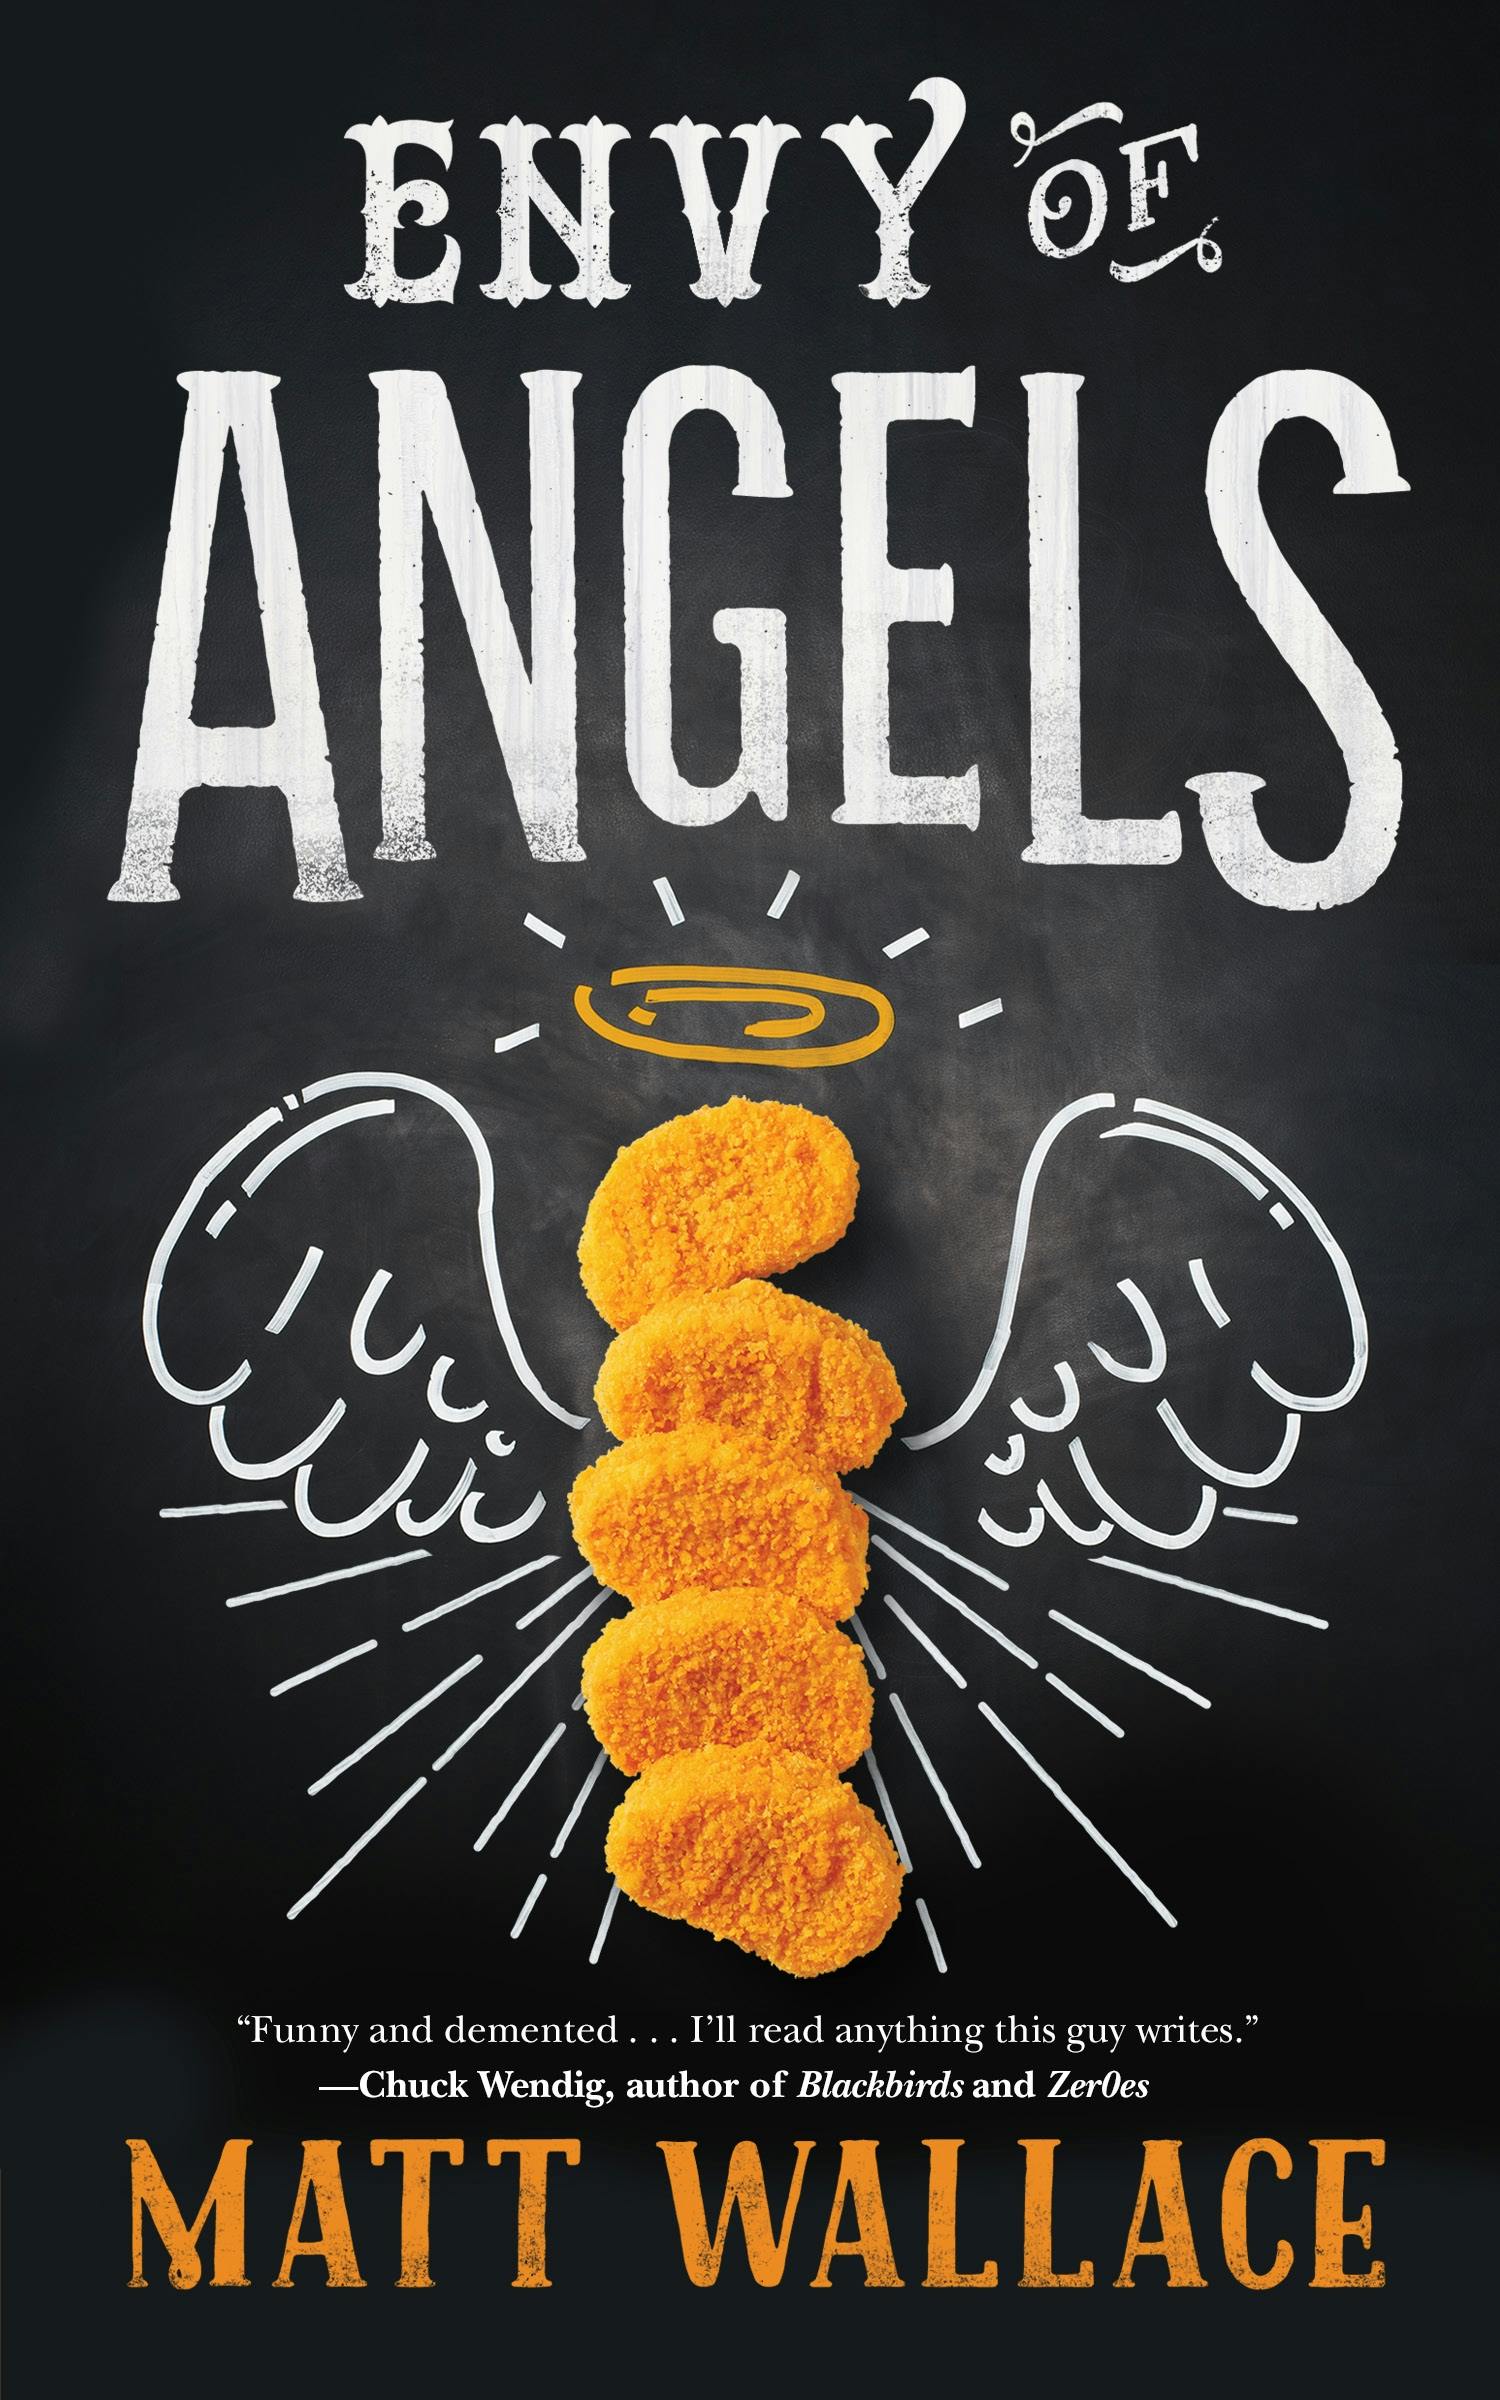 Cover for the book titled as: Envy of Angels